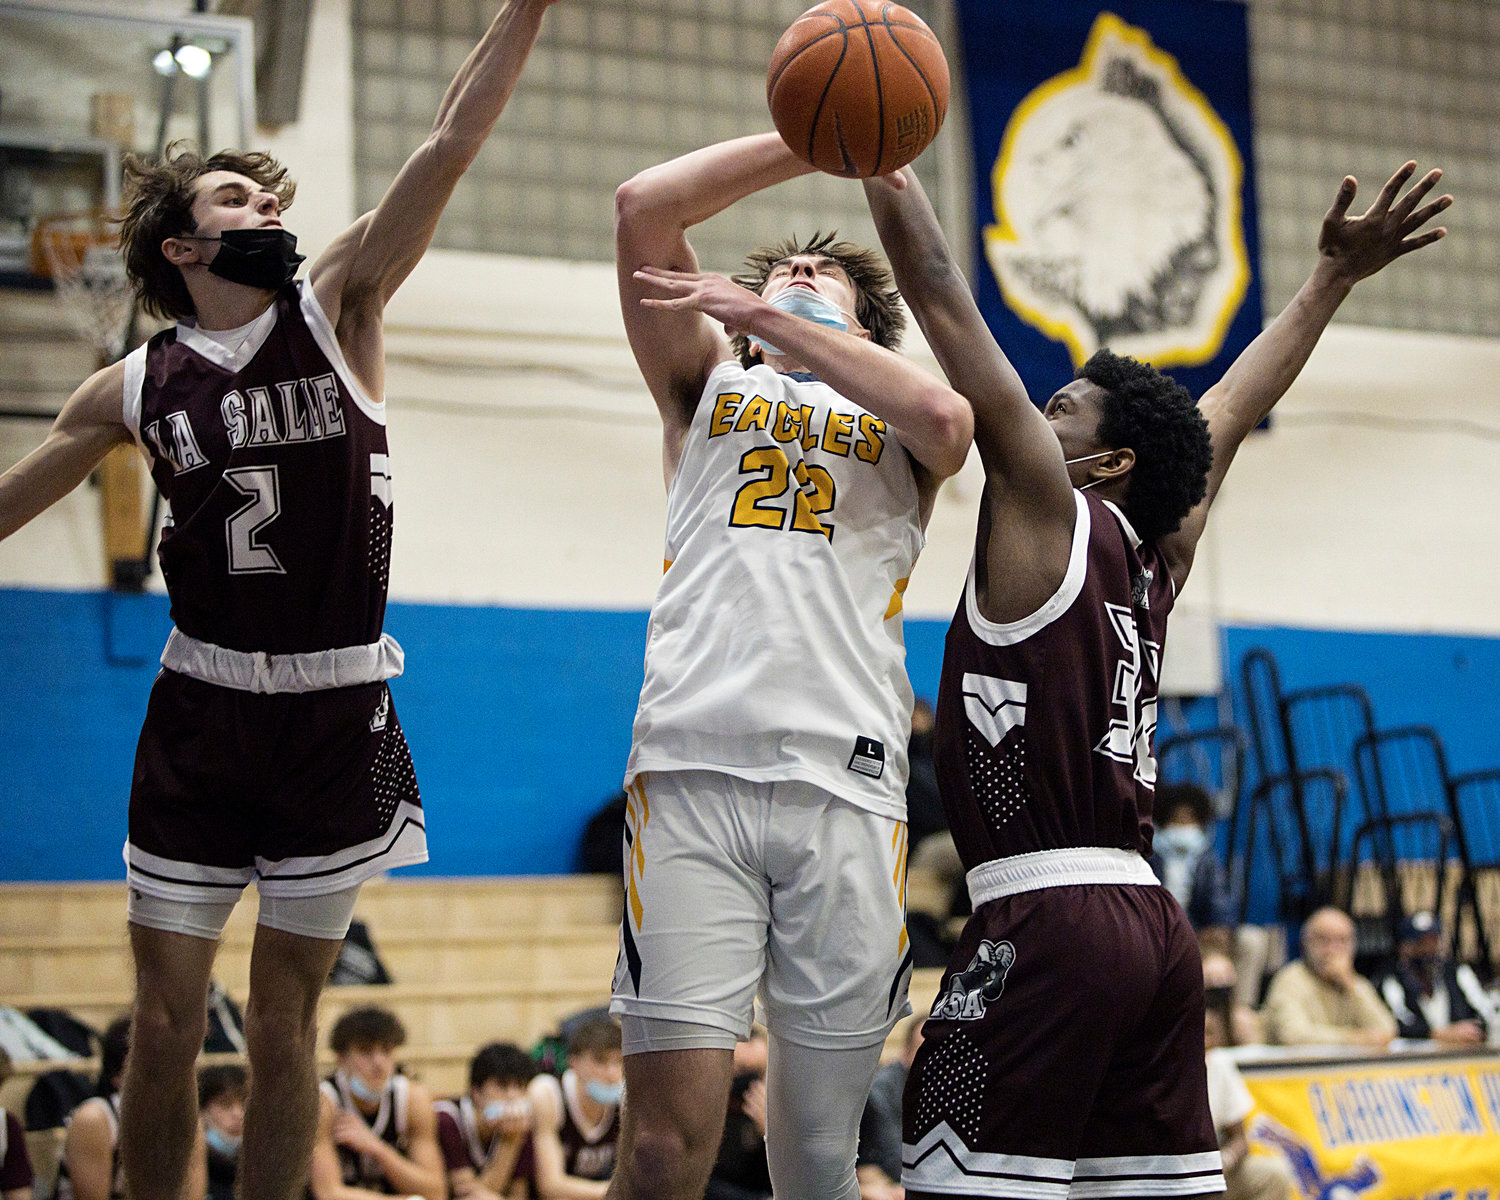 Jack Abadi loses control of the ball under the hoop, during Monday's game, against LaSalle.